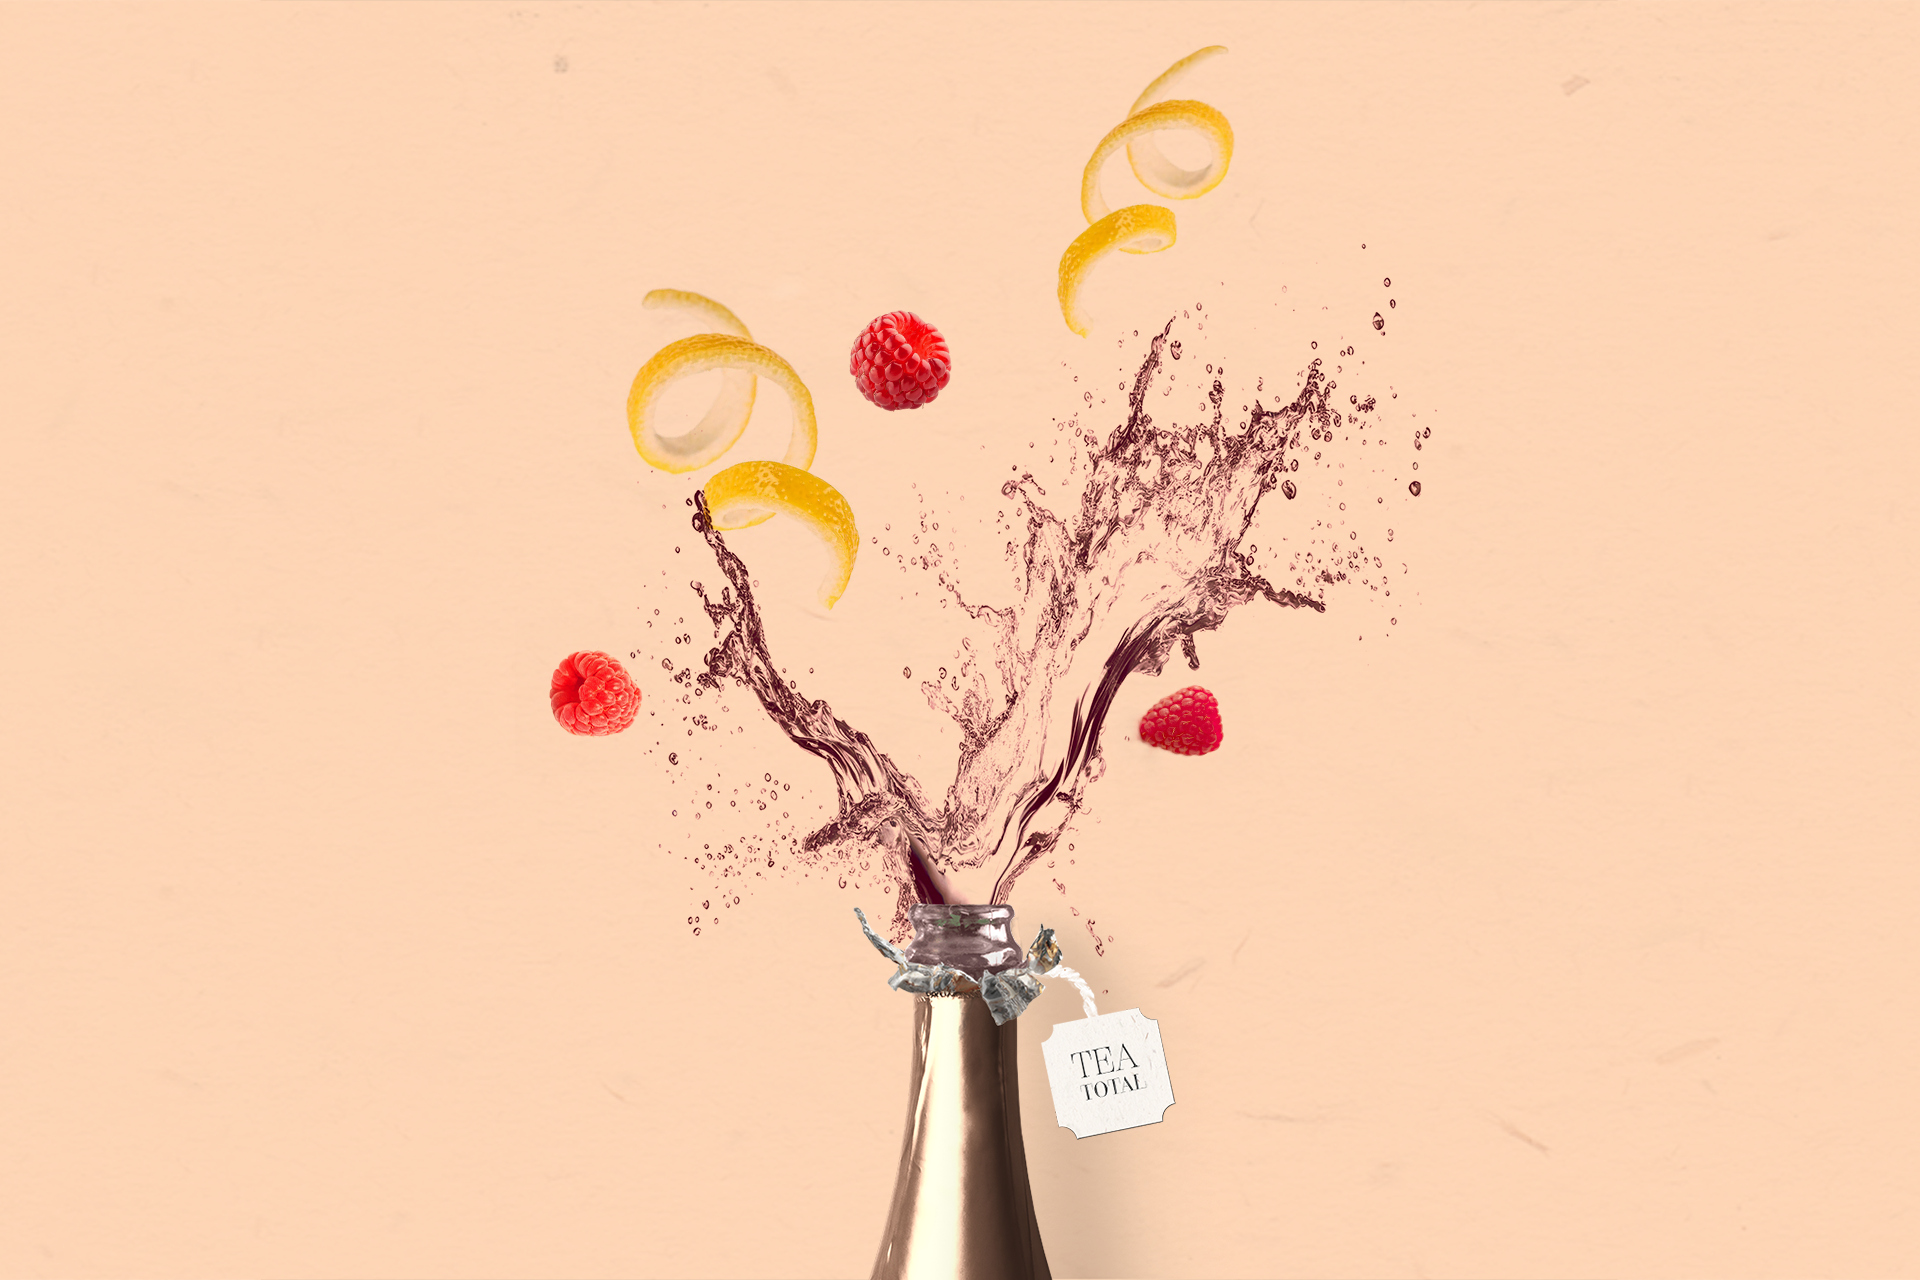 Moving image social advertisement by Emily Morris showing celebration scenes, and product photography explaining the concept for the 0% alcohol tea infusion 'champagne' drink.